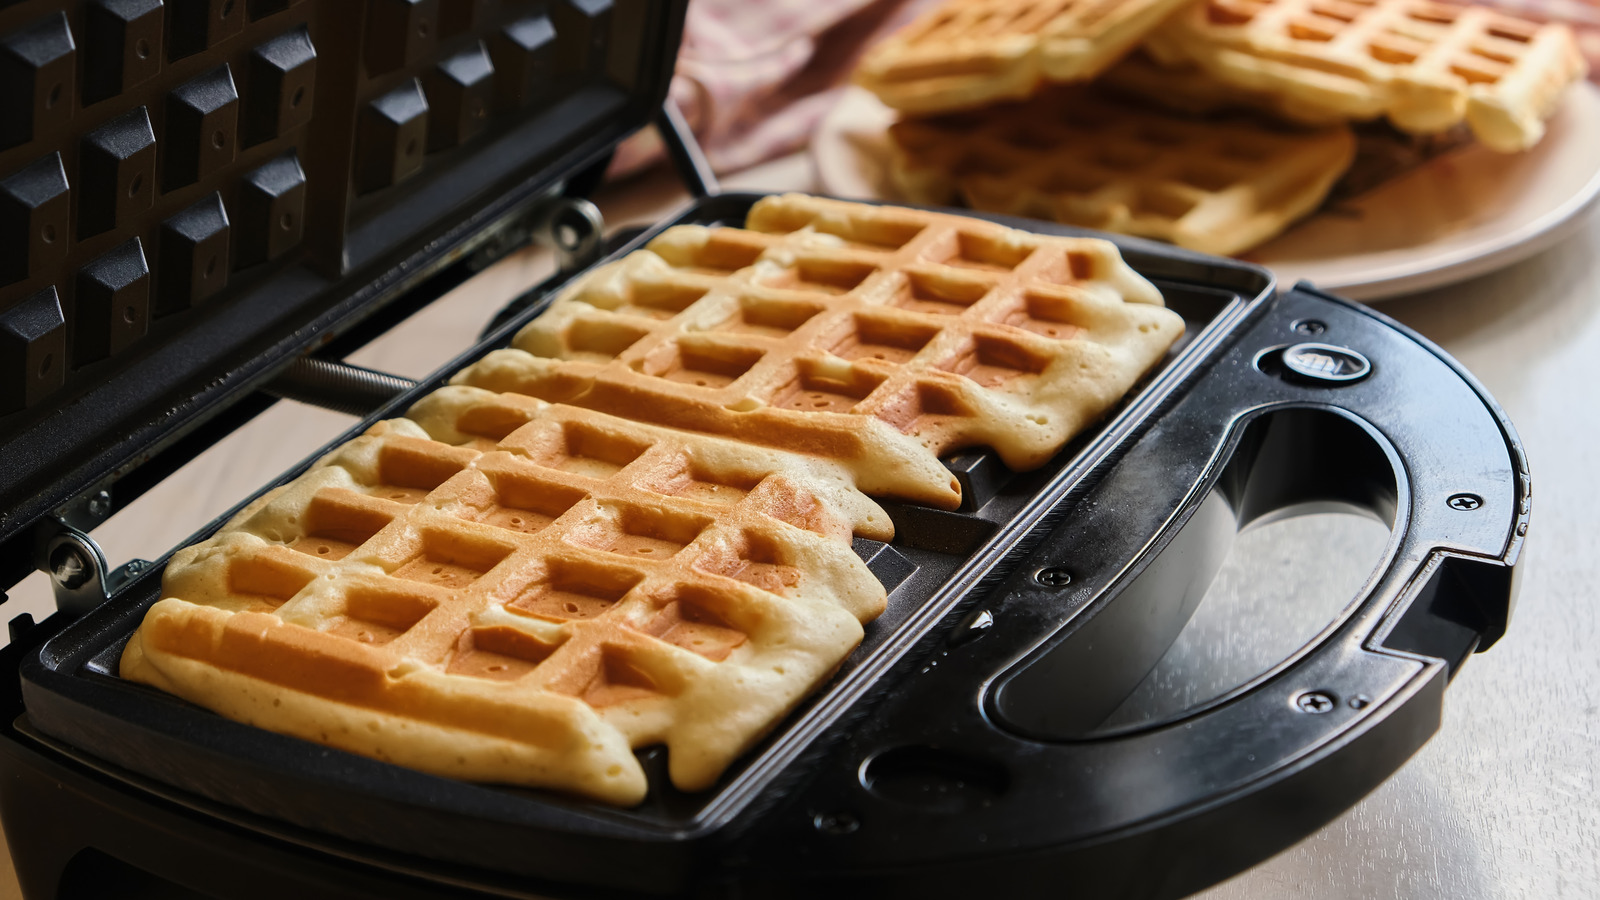 https://www.mashed.com/img/gallery/over-400000-waffle-makers-were-just-recalled-after-severe-burns/l-intro-1684793492.jpg